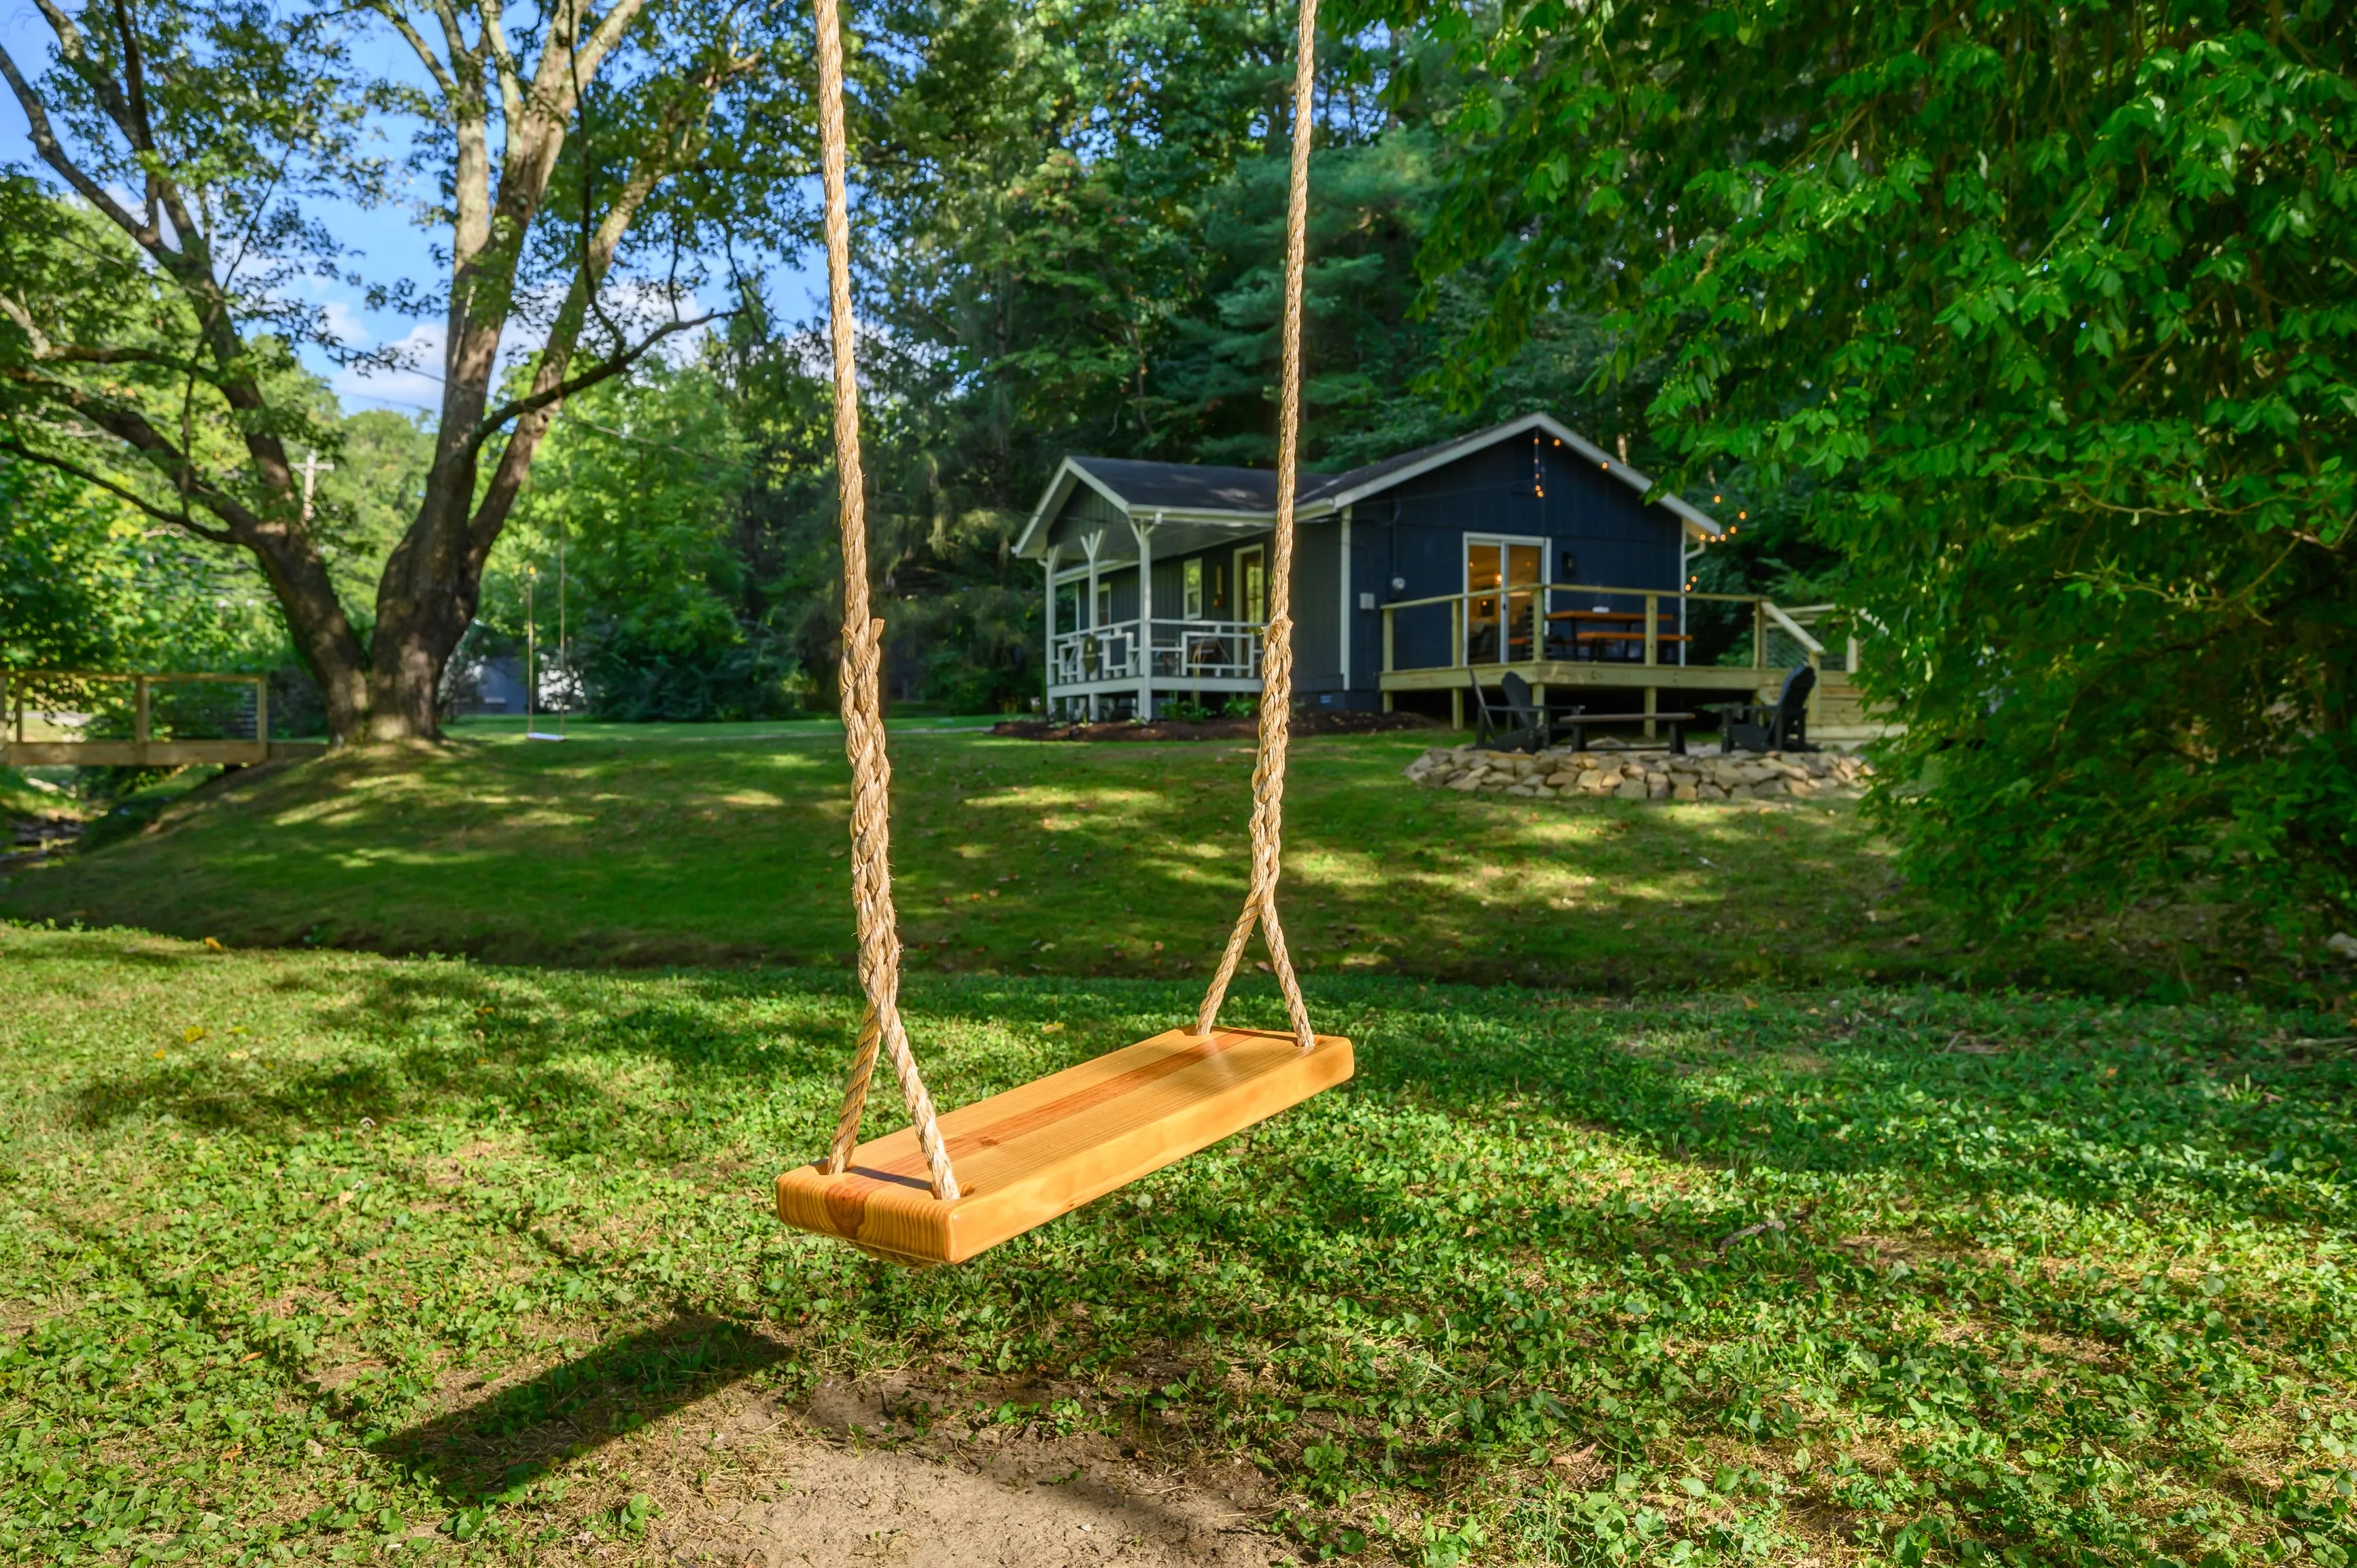 Wooden swing hanging from a tree in a lush backyard with a cozy house in the background.